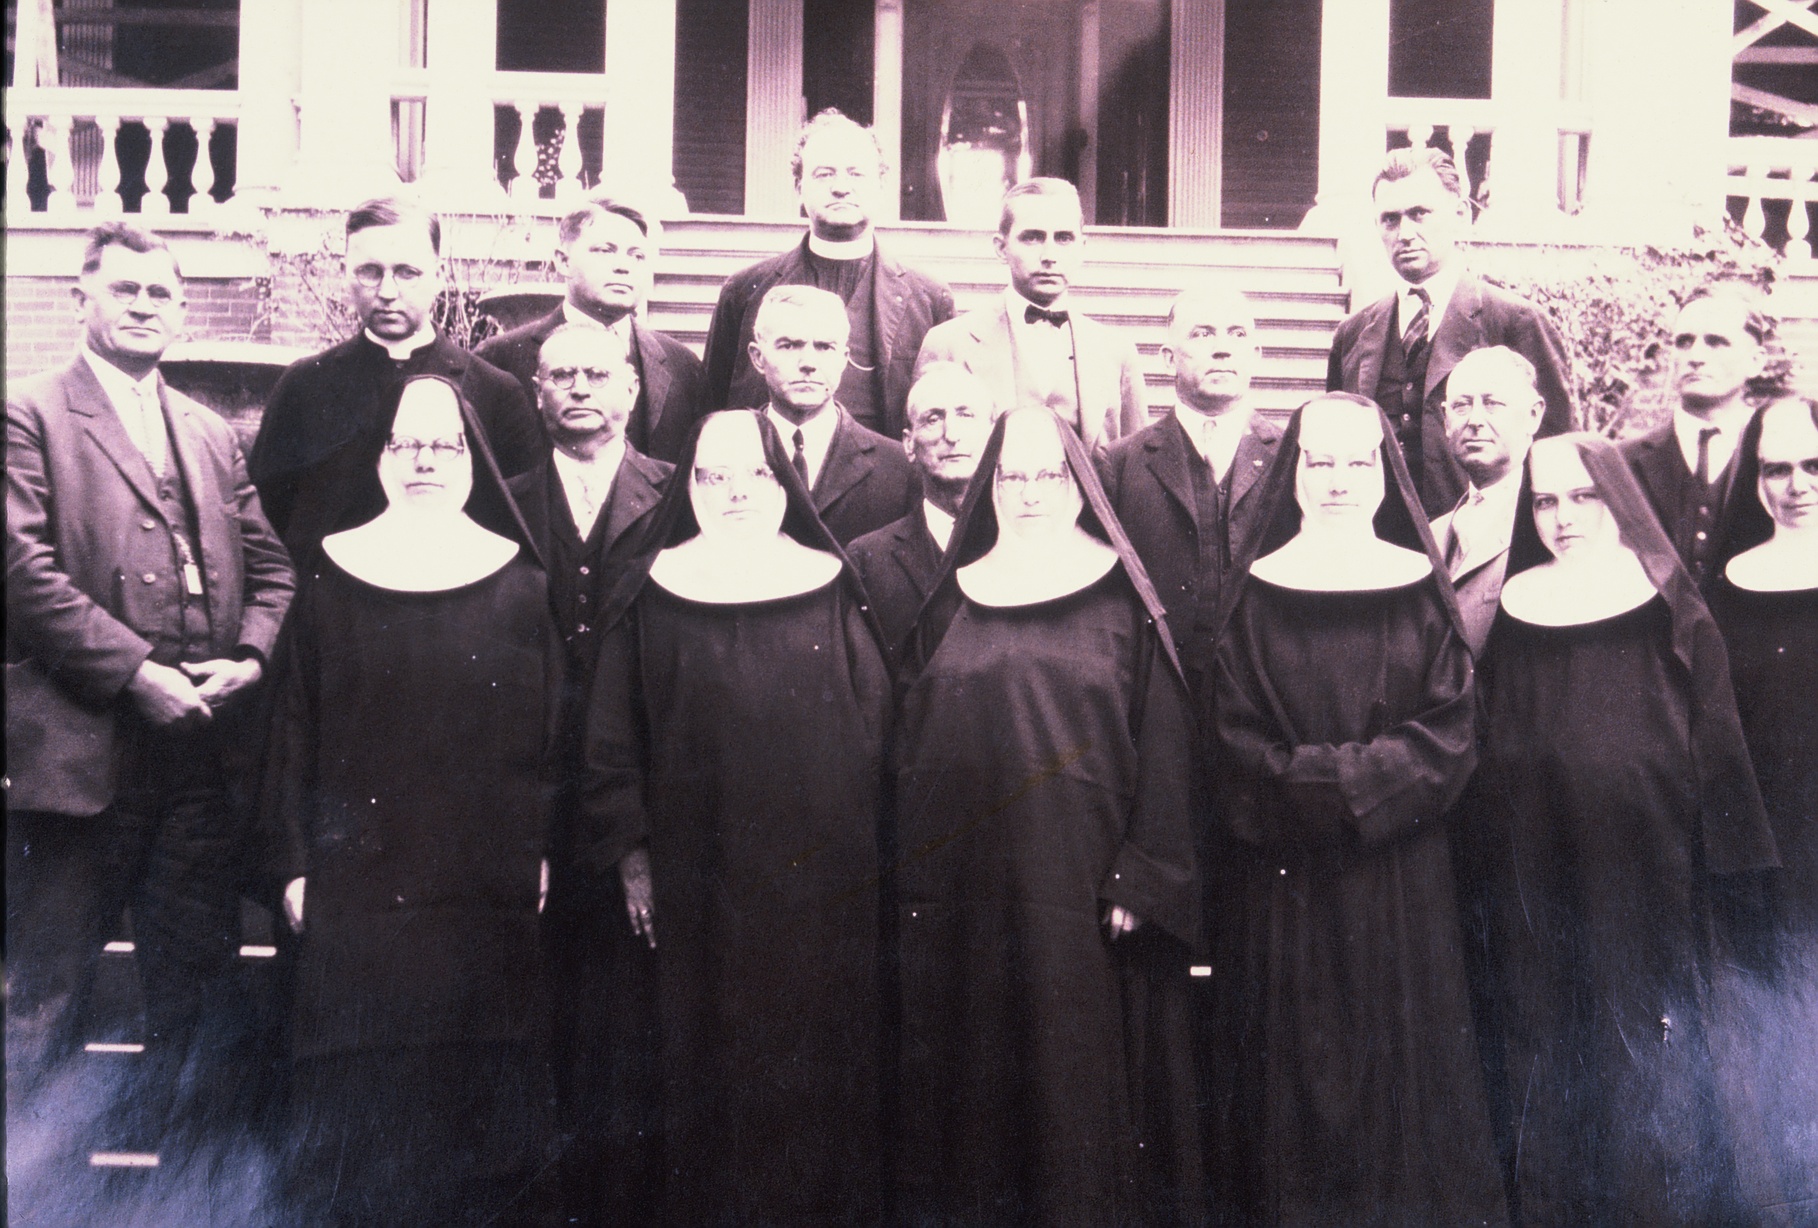 St. Anthony's Sisters - 1937